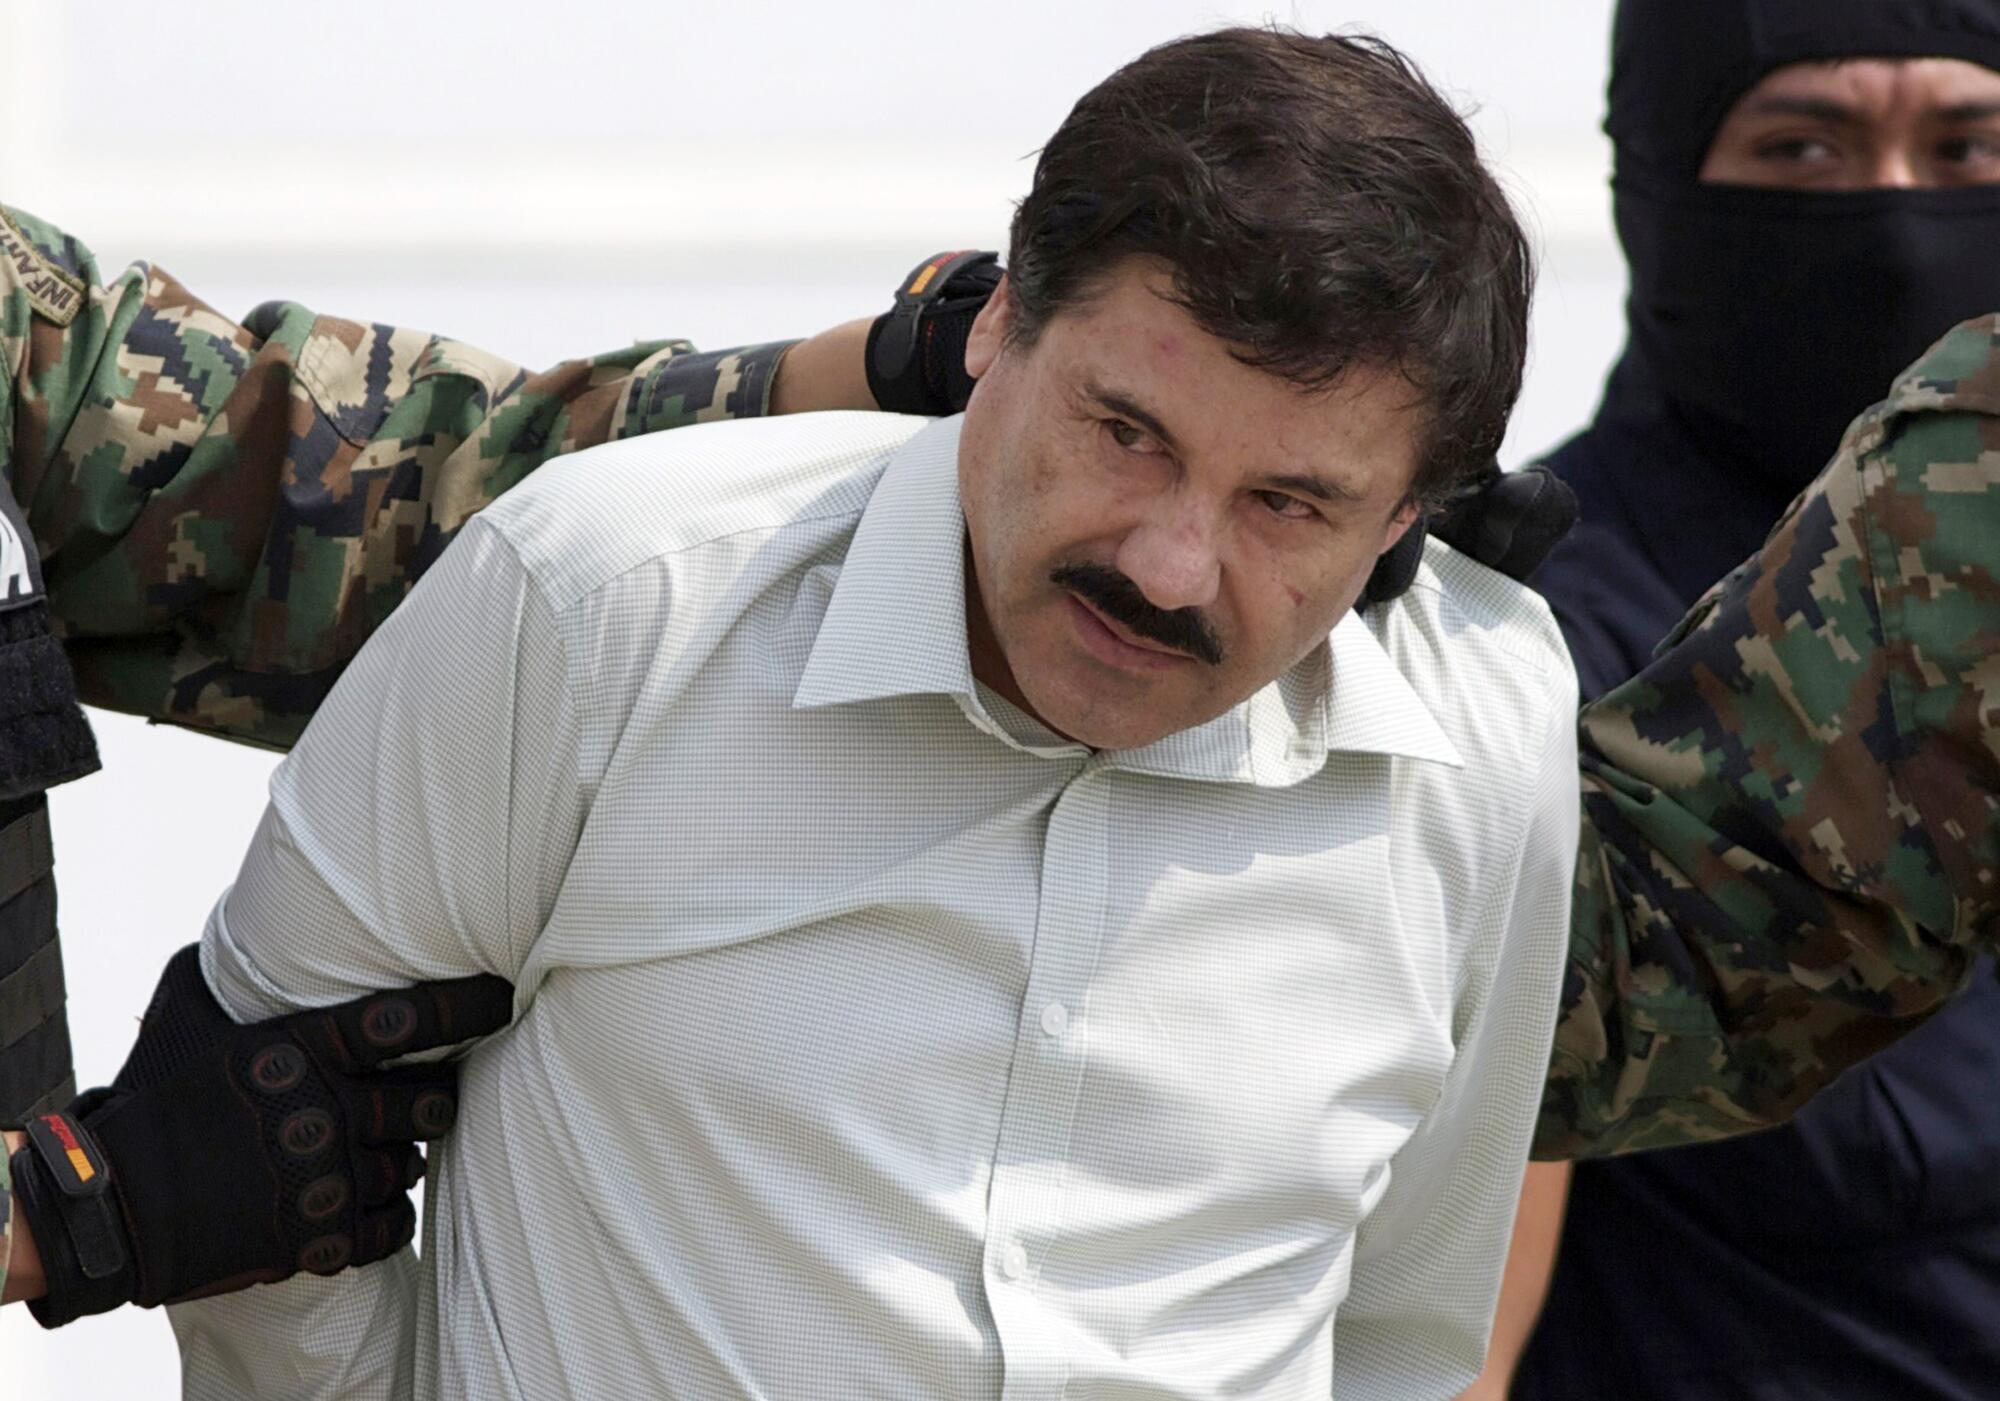 Joaquin "El Chapo" Guzmán ducks his head as he walks while being detained by people in camoflauge. 